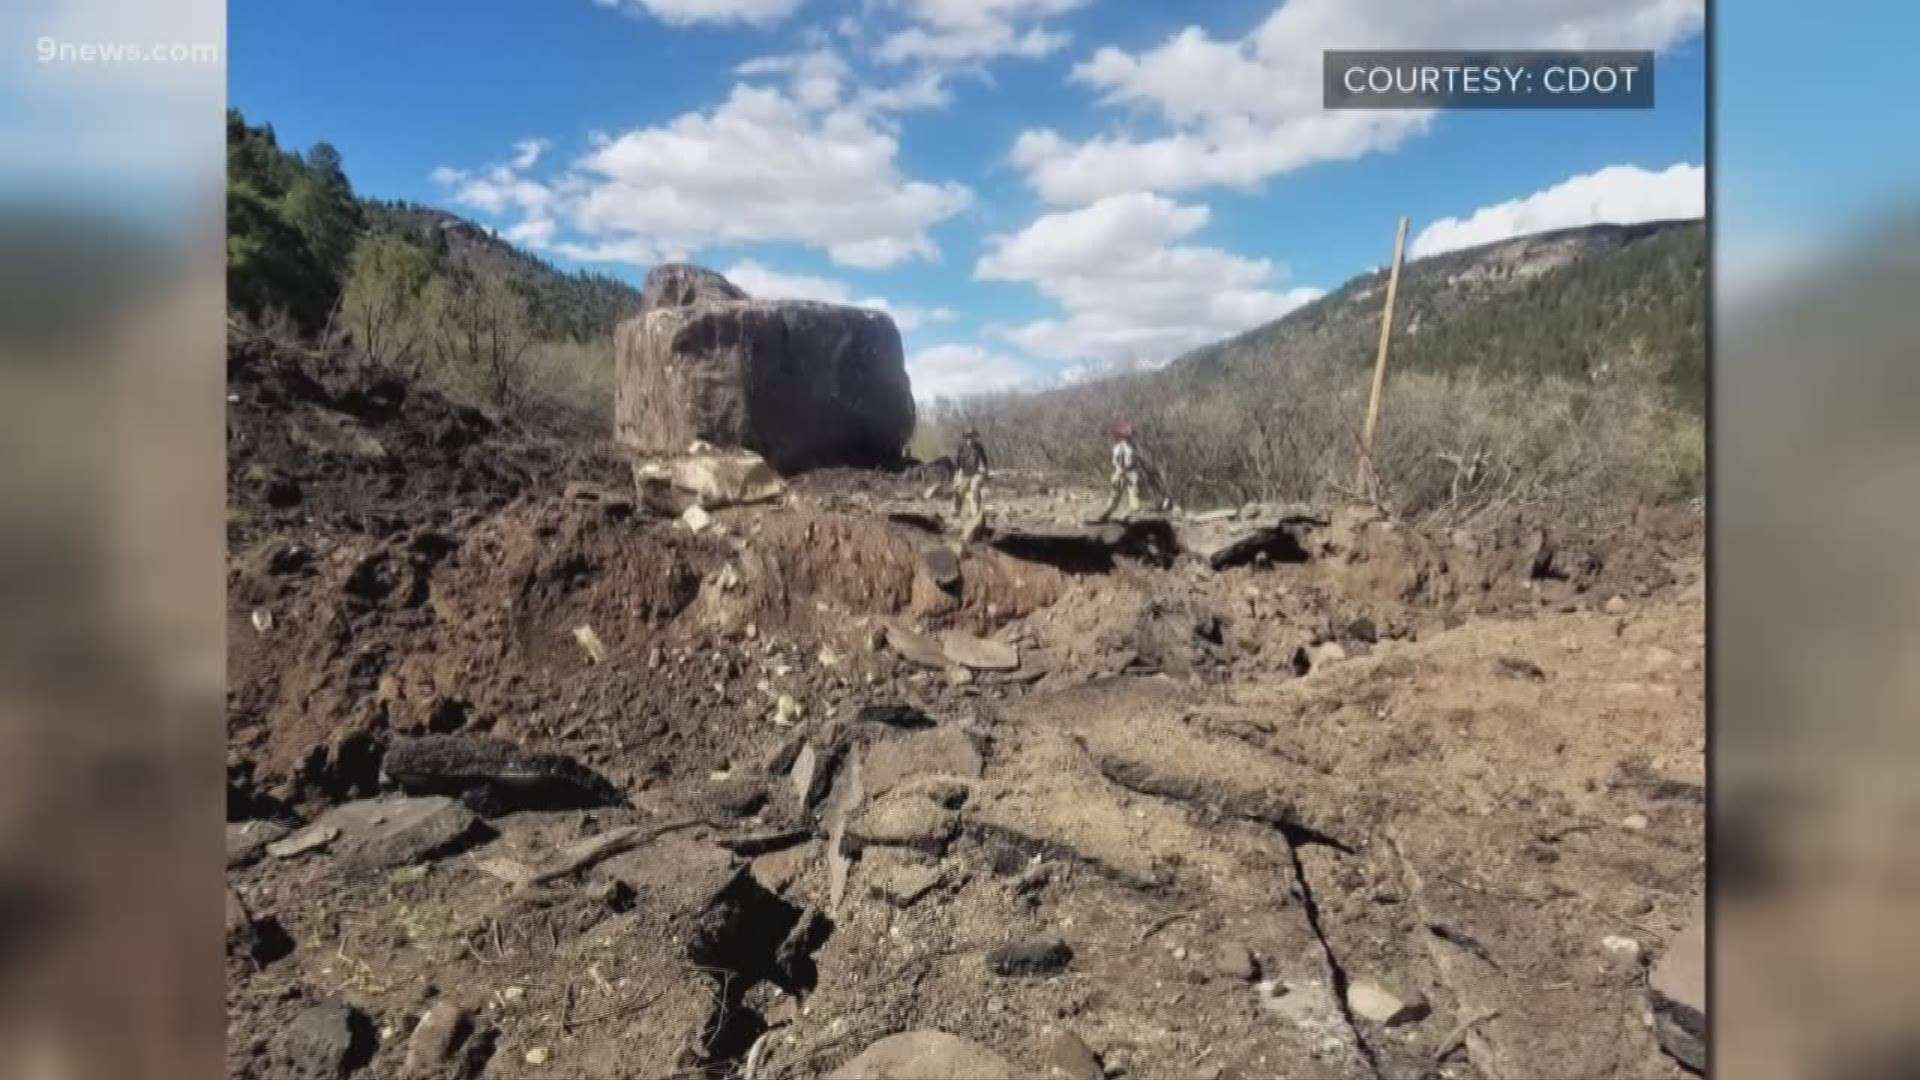 A boulder "the size of a building" is still on the road and will need to be blasted into smaller pieces before it can be removed.